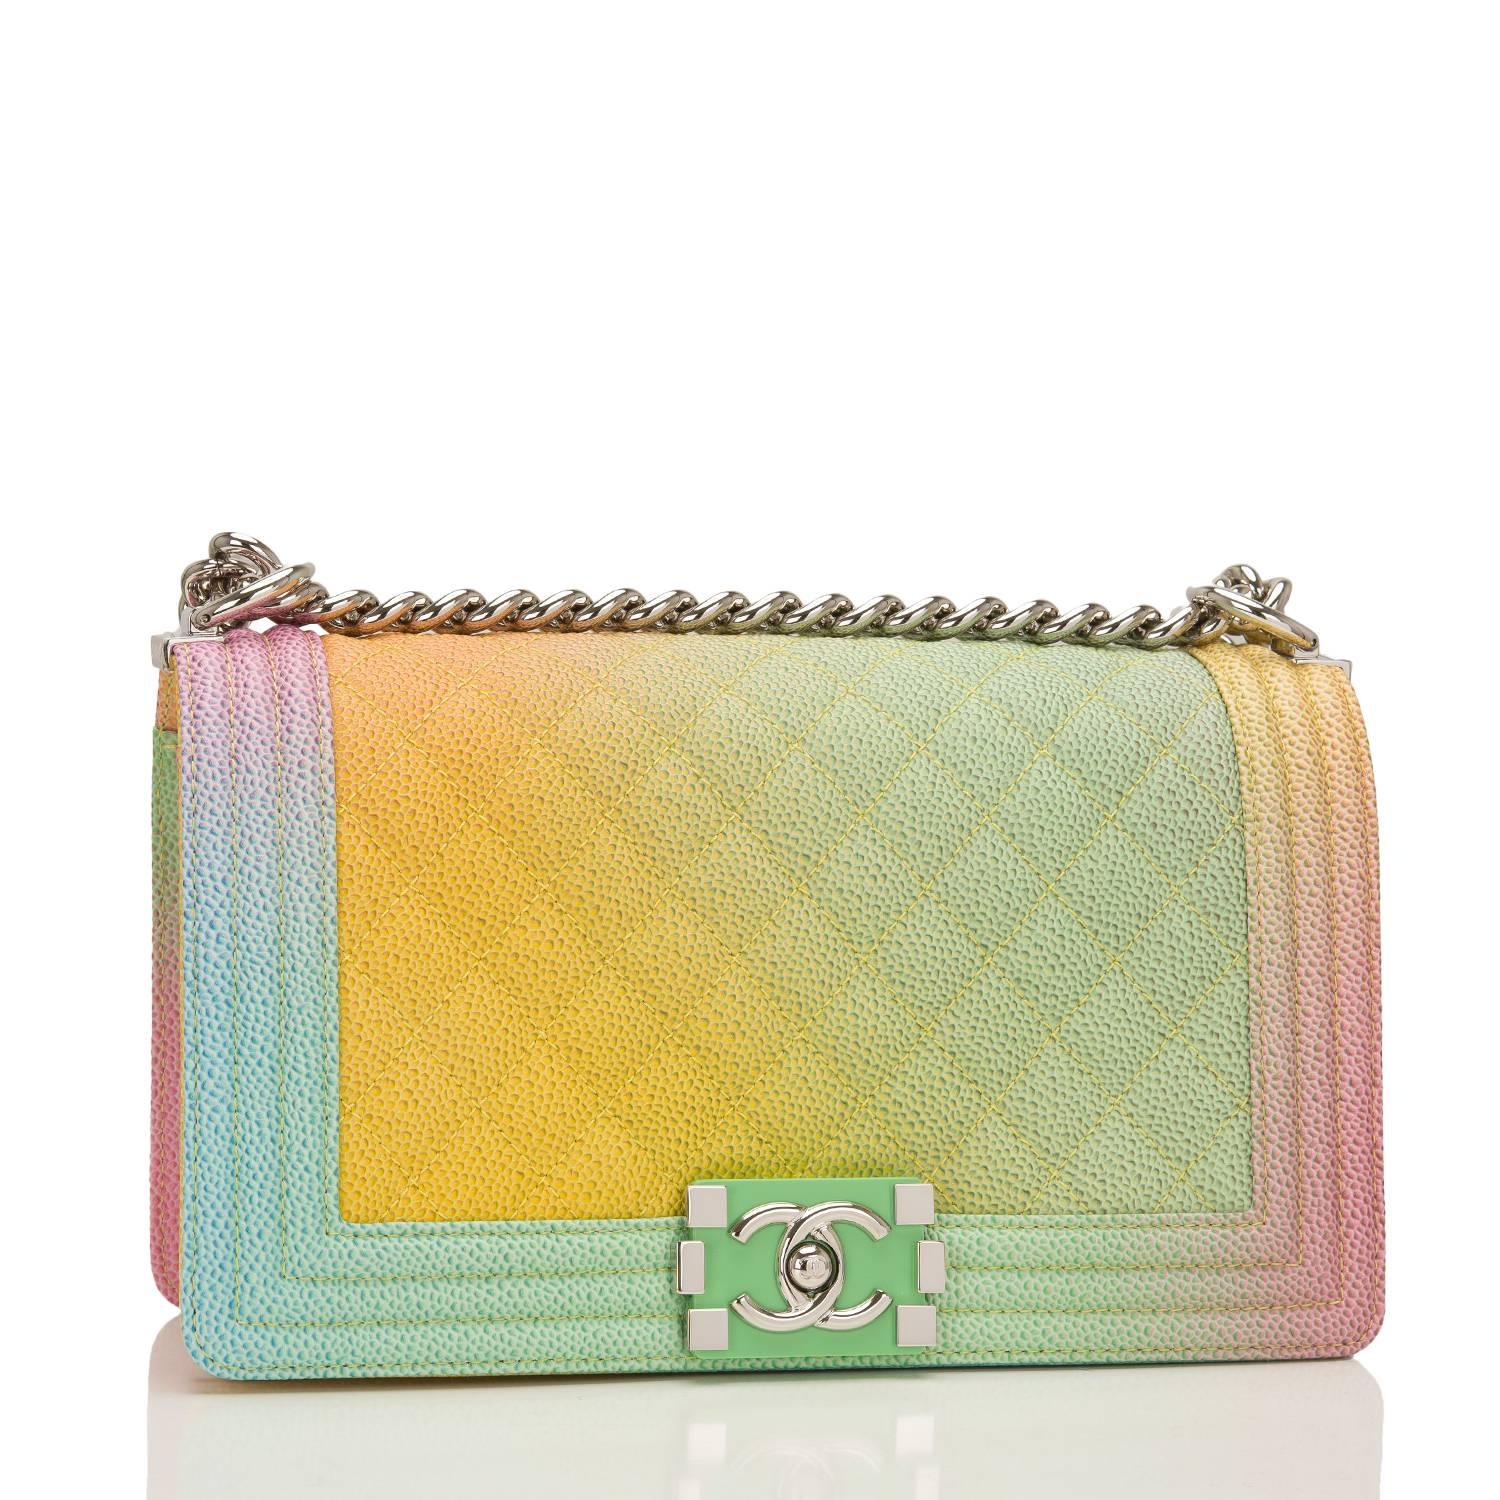 Chanel Old Medium Boy bag of rainbow printed caviar leather with silver tone hardware.

This limited edition bag from the Cuba collection features a full front flap with the Le Boy CC push lock closure of green resin and silver tone hardware and a